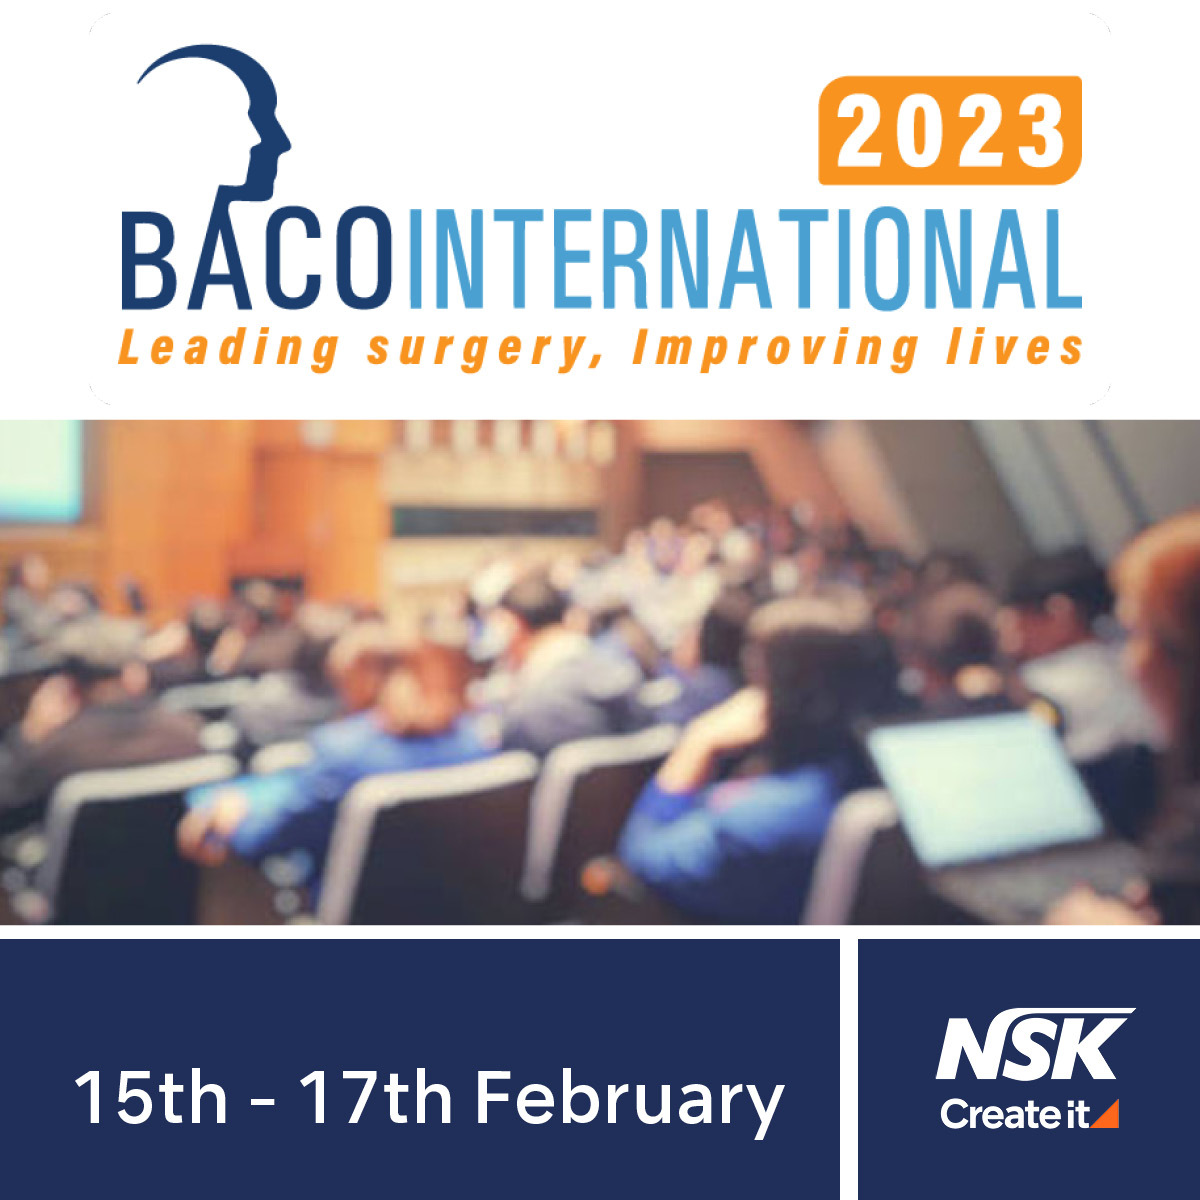 Are you heading to BACO International 2023 today? Come and find us at the Severn Healthcare Stand 46 to find out all about NSK Surgical and see our pioneering products in action. #ENT #Spine #Orthopaedics #BACO2023